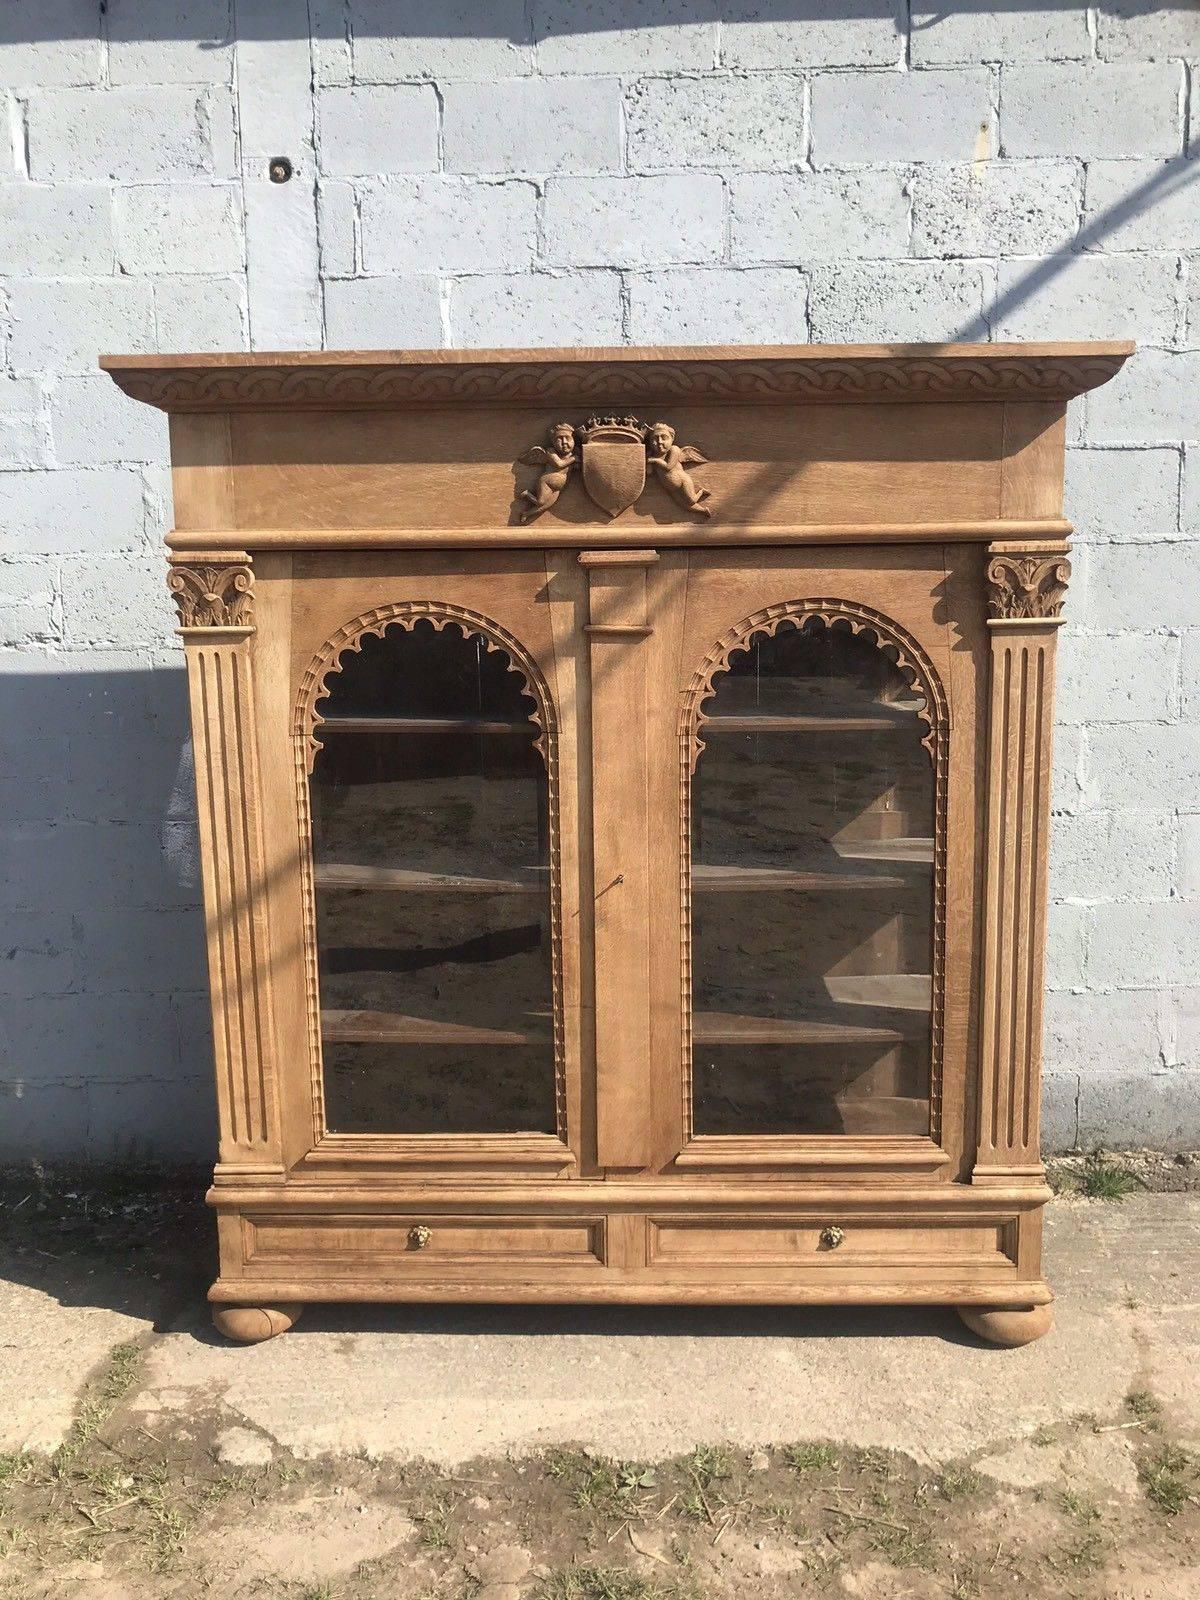 Here we have a stunning Dutch display cupboard. Made from oak, it’s showing lovely patina and age. Bought in gent and removed from a castle, which was open to the public. This has housed many artefacts that were on display.

Dates back to